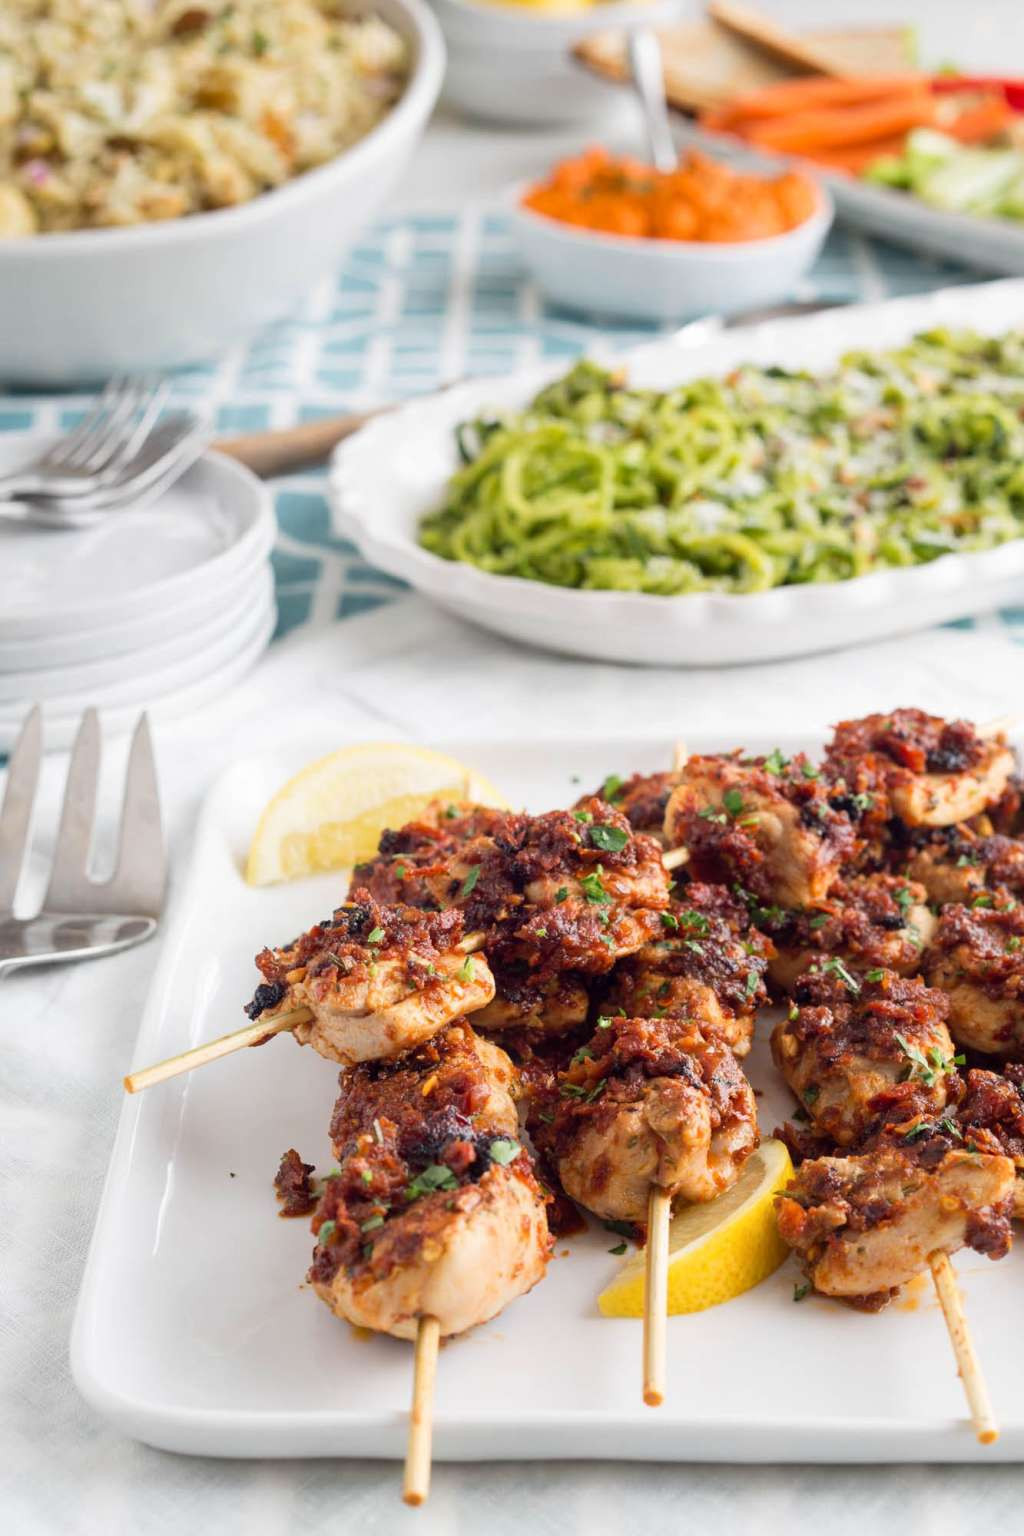 Birthday Dinner Ideas
 5 Recipes for a Casual Dinner Outdoors